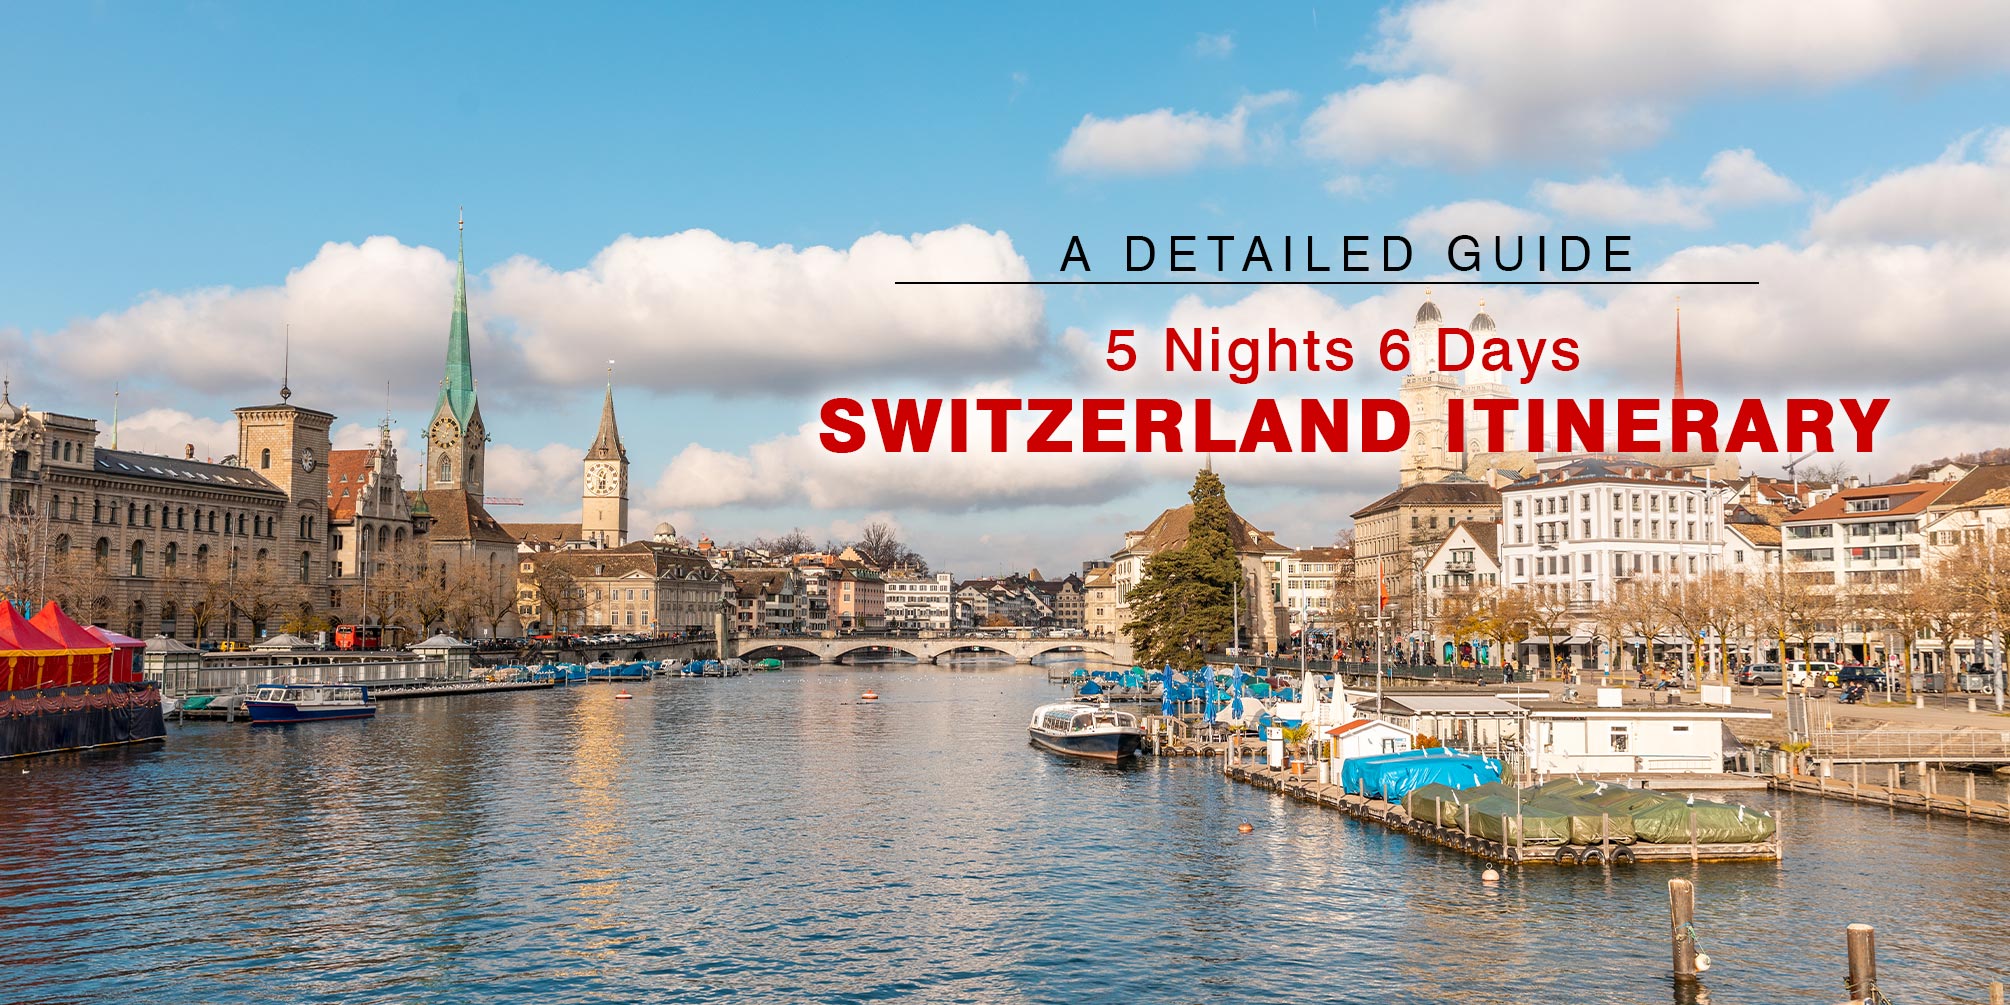 tour guide for switzerland